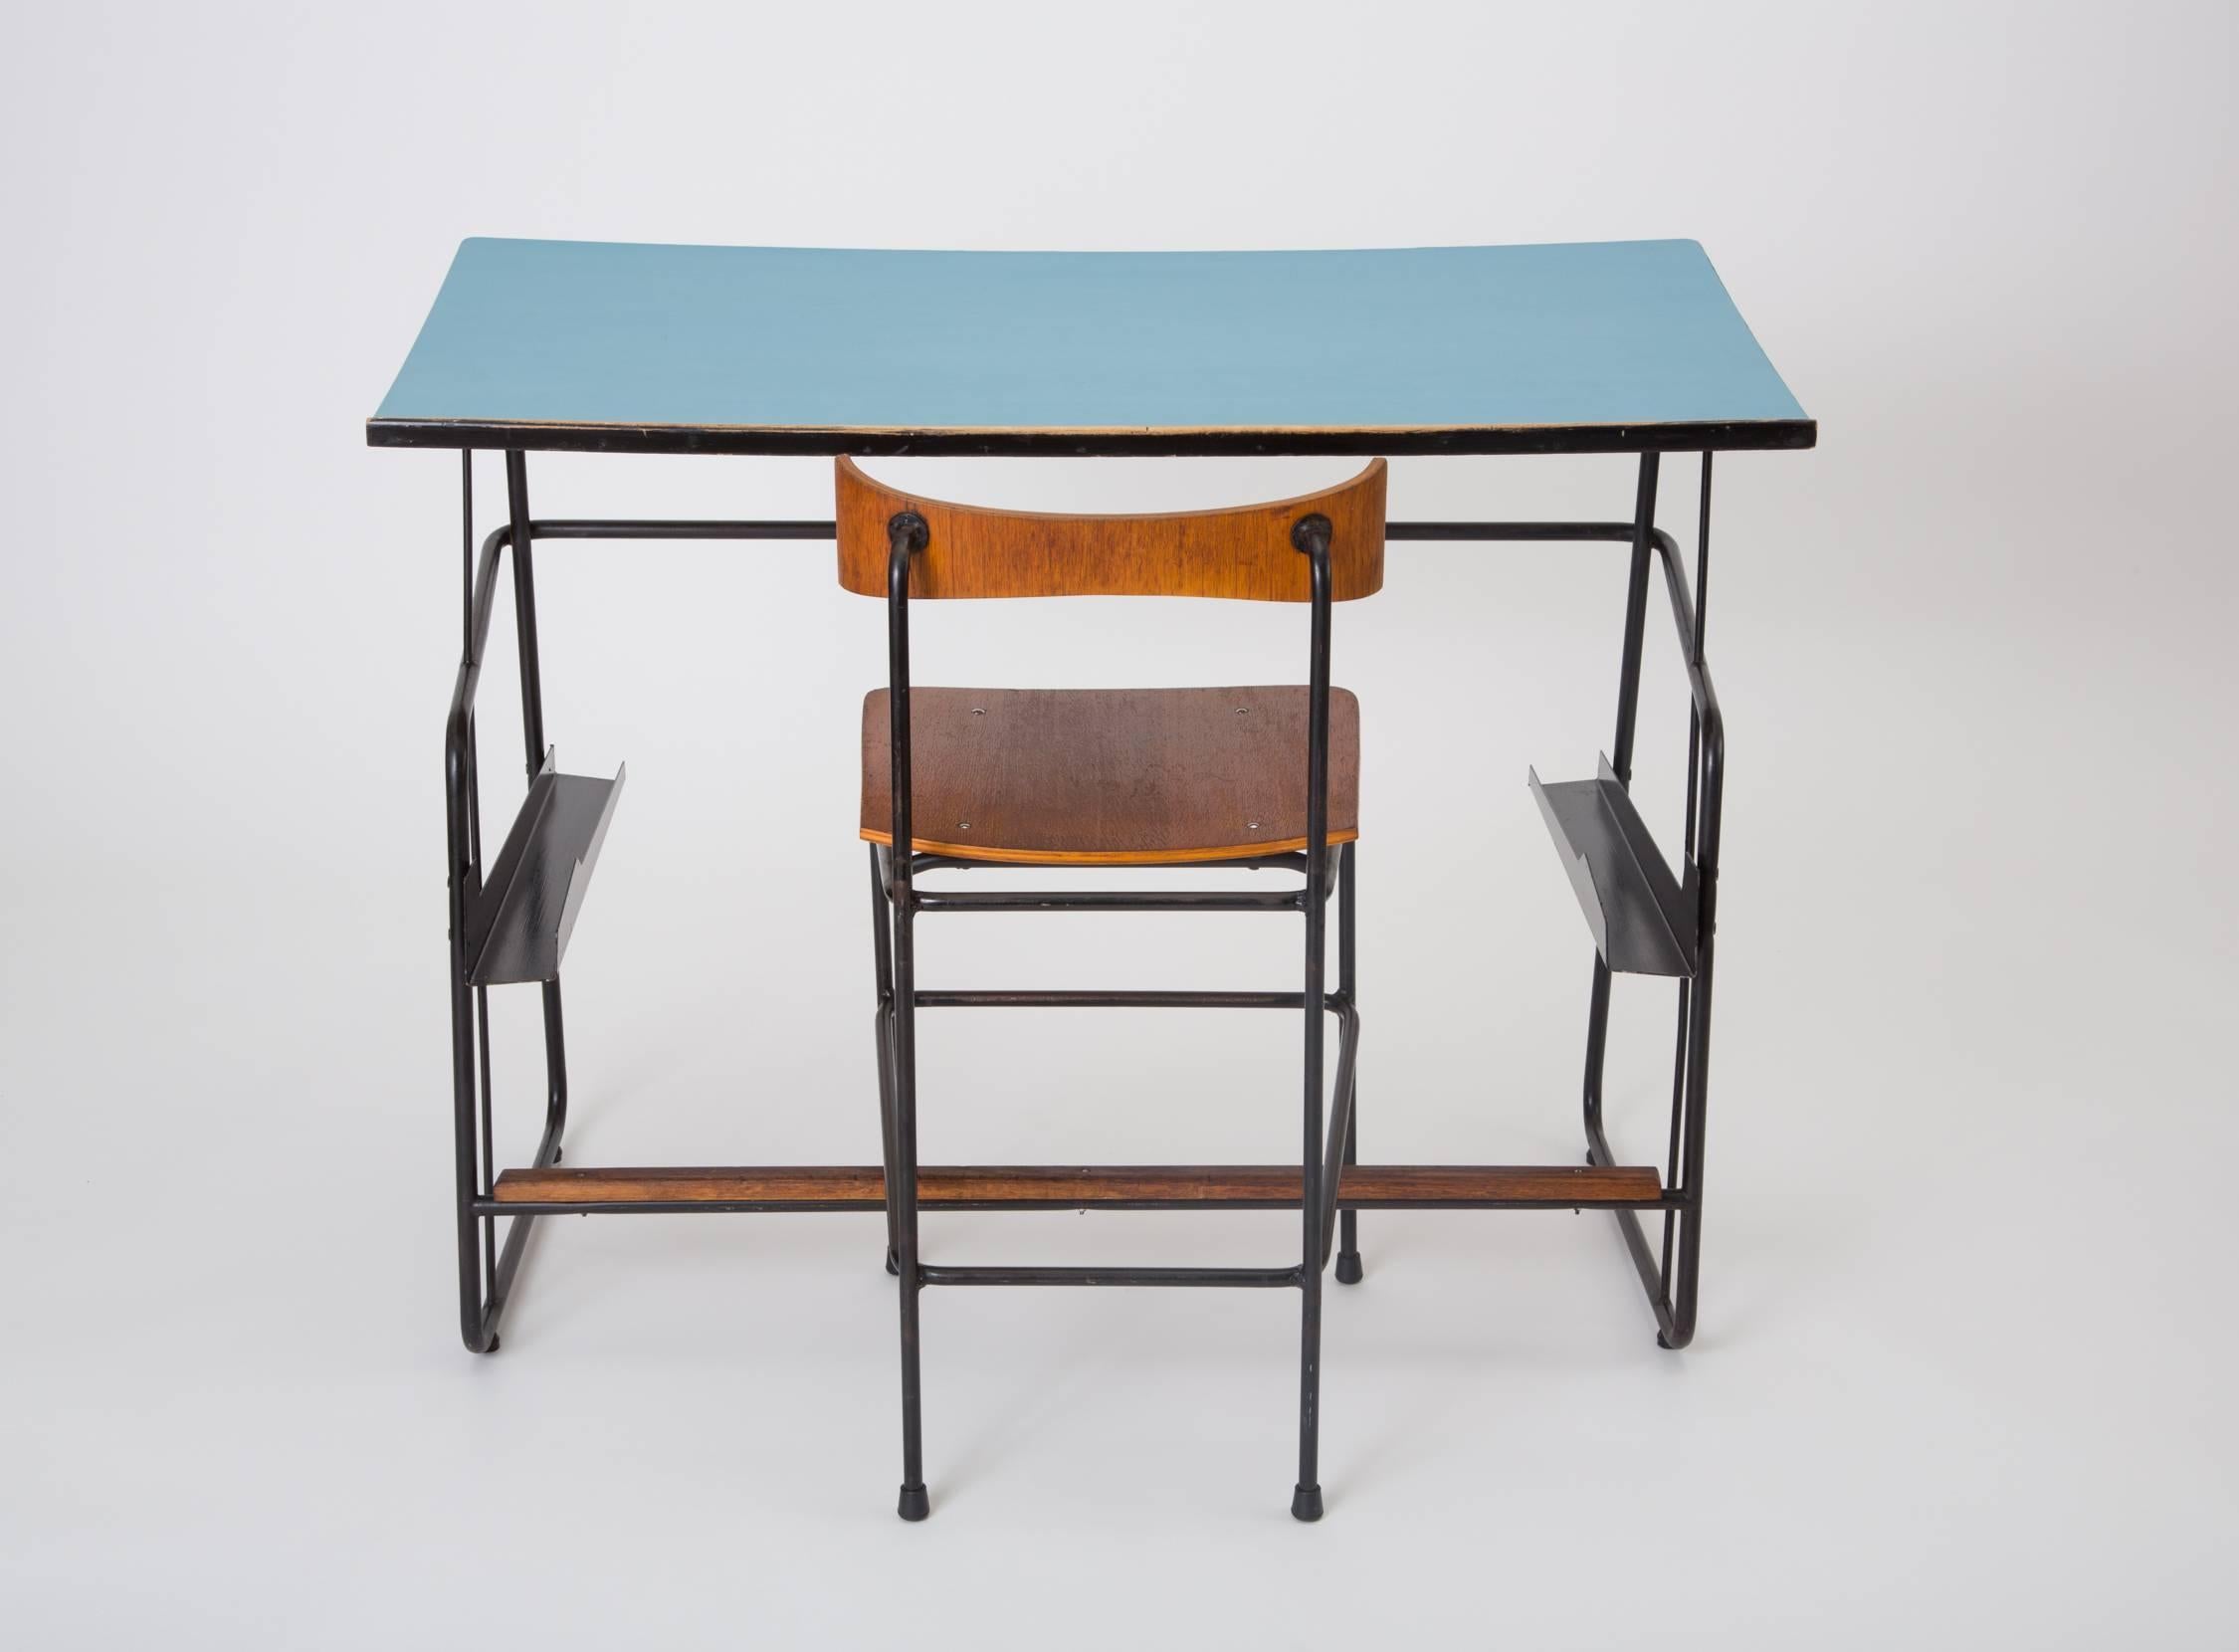 Designed in 1959, this drafting set was originally produced for use in the architecture school at the University of Ghent, and was manufactured in Deinze by Swan. Comprising a tall desk and chair, the set has industrial stylings, with a frame of